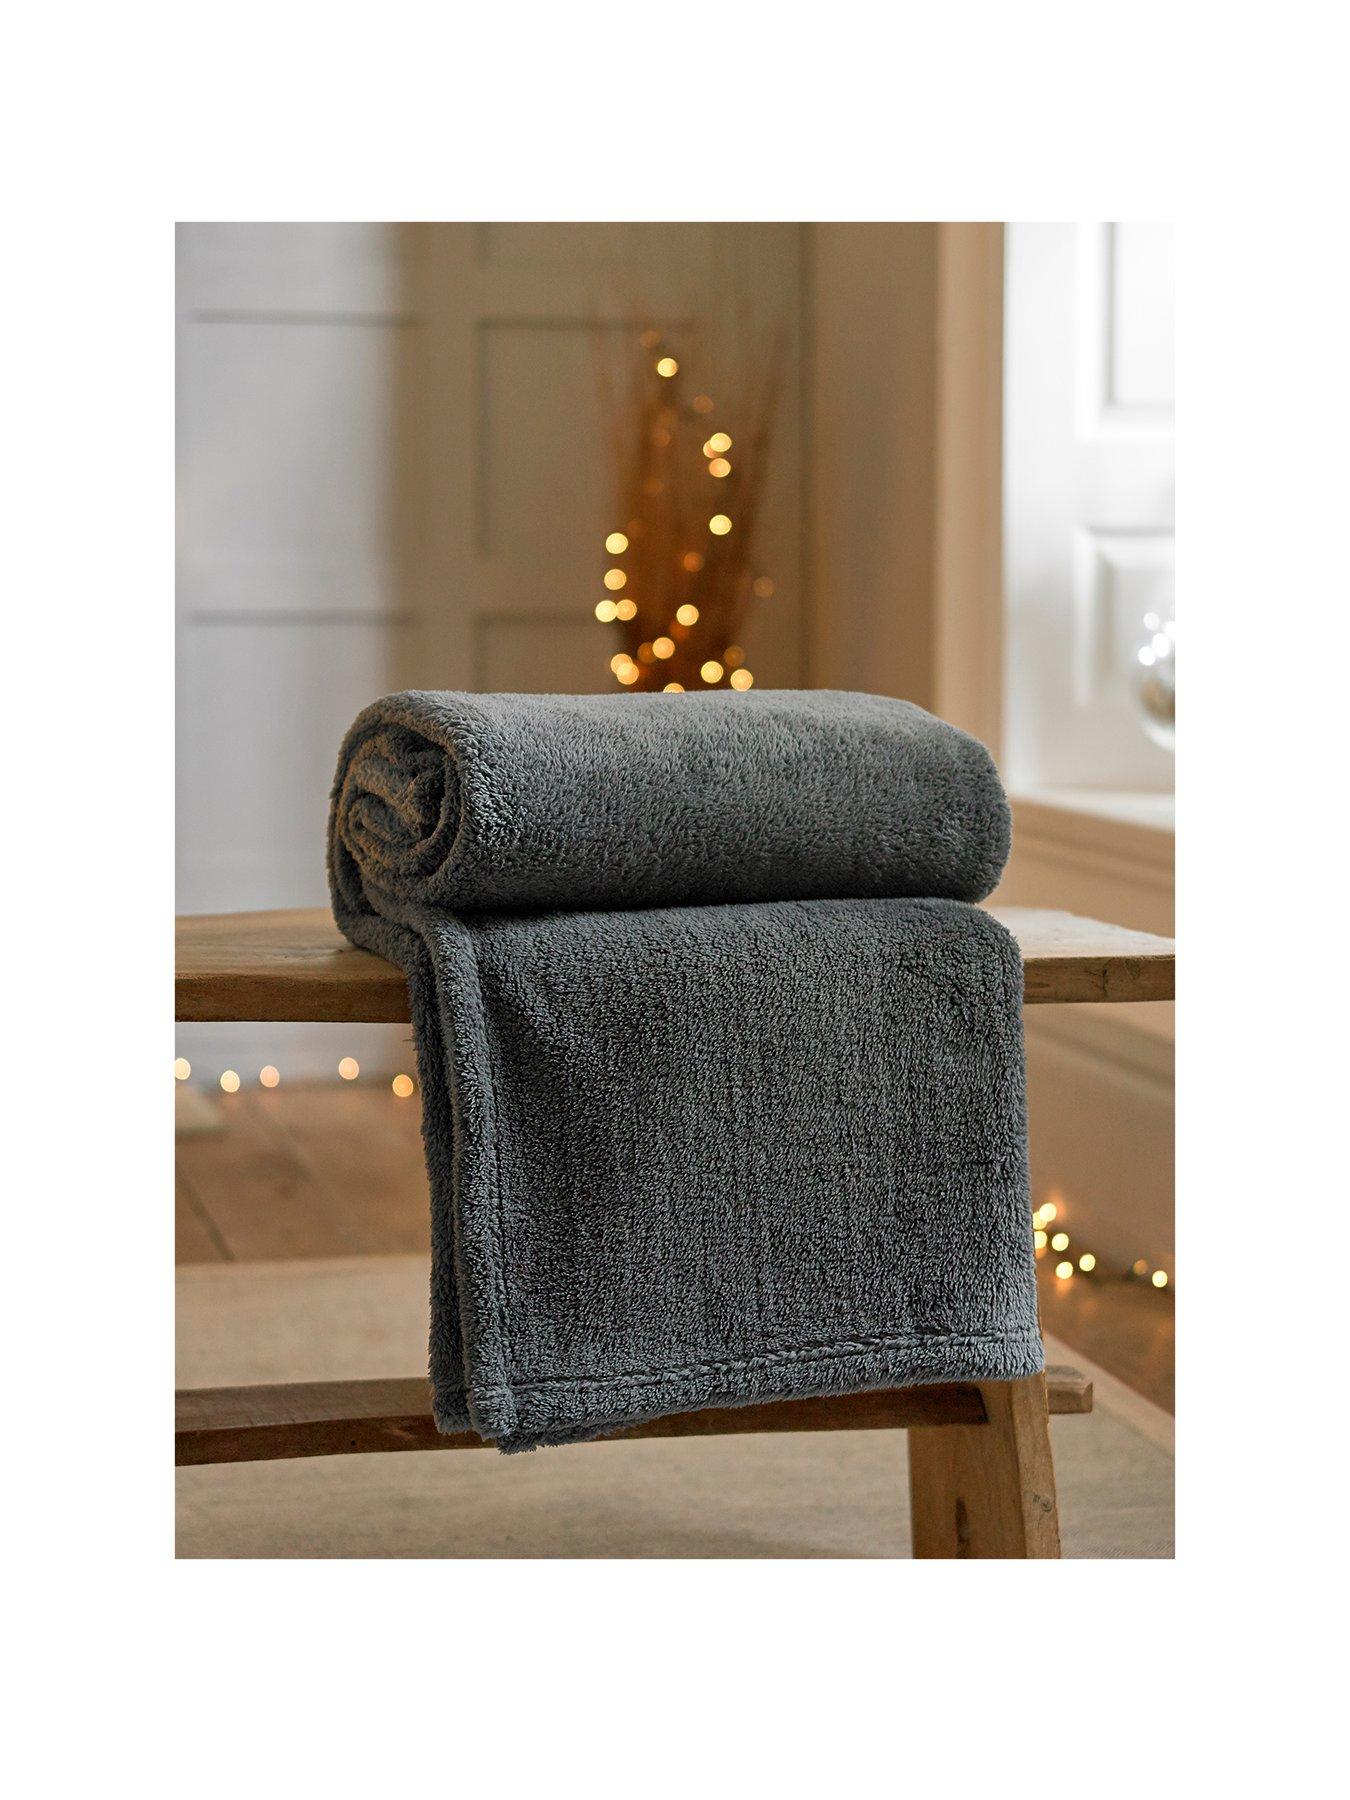 Black Life Tree Flannel Fleece Soft Blankets All Season 40x60inch HELLOWINK Throw Blankets for Couch Bed Sofa Warm Lightweight Luxury Microfiber Throws 